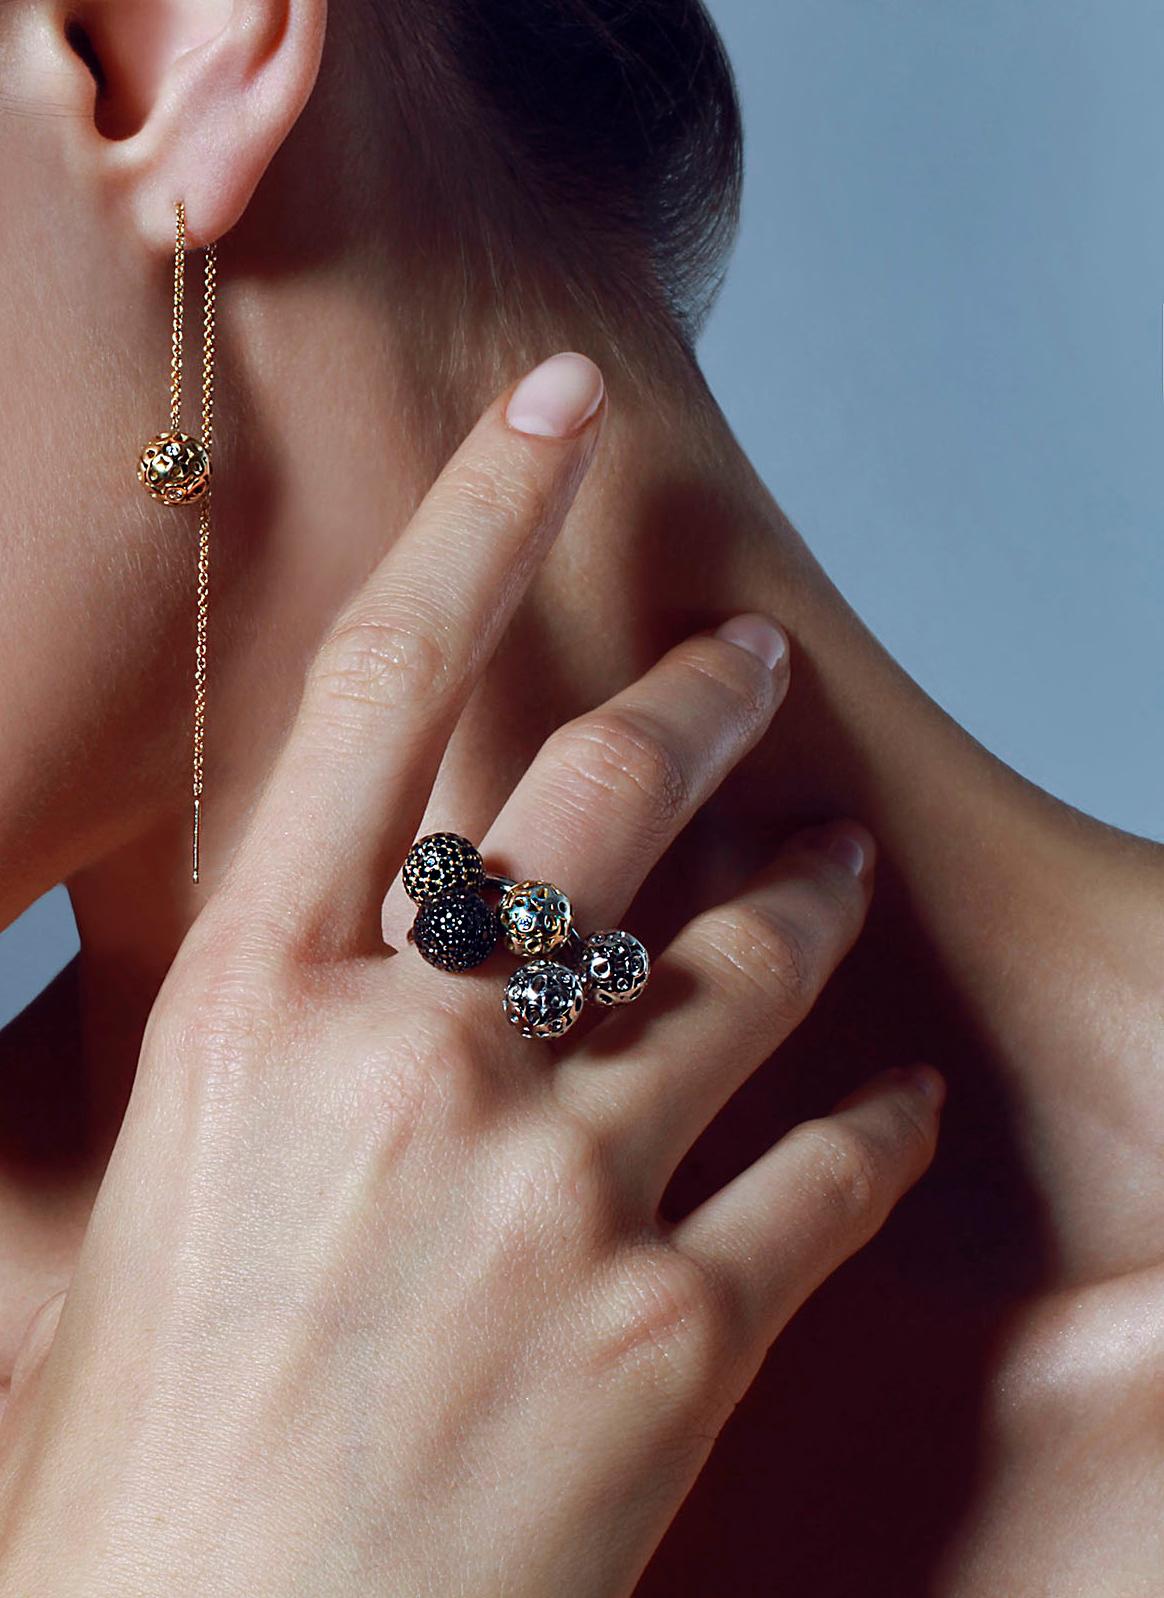 Adjustable U-shape ring with encrusted spheres consisting of Hi June Parker's signature 
Organic circles with white diamonds and pavé ball with black diamonds.

Inspired by seeing the cross-section view of life, as if slicing a tree to see its